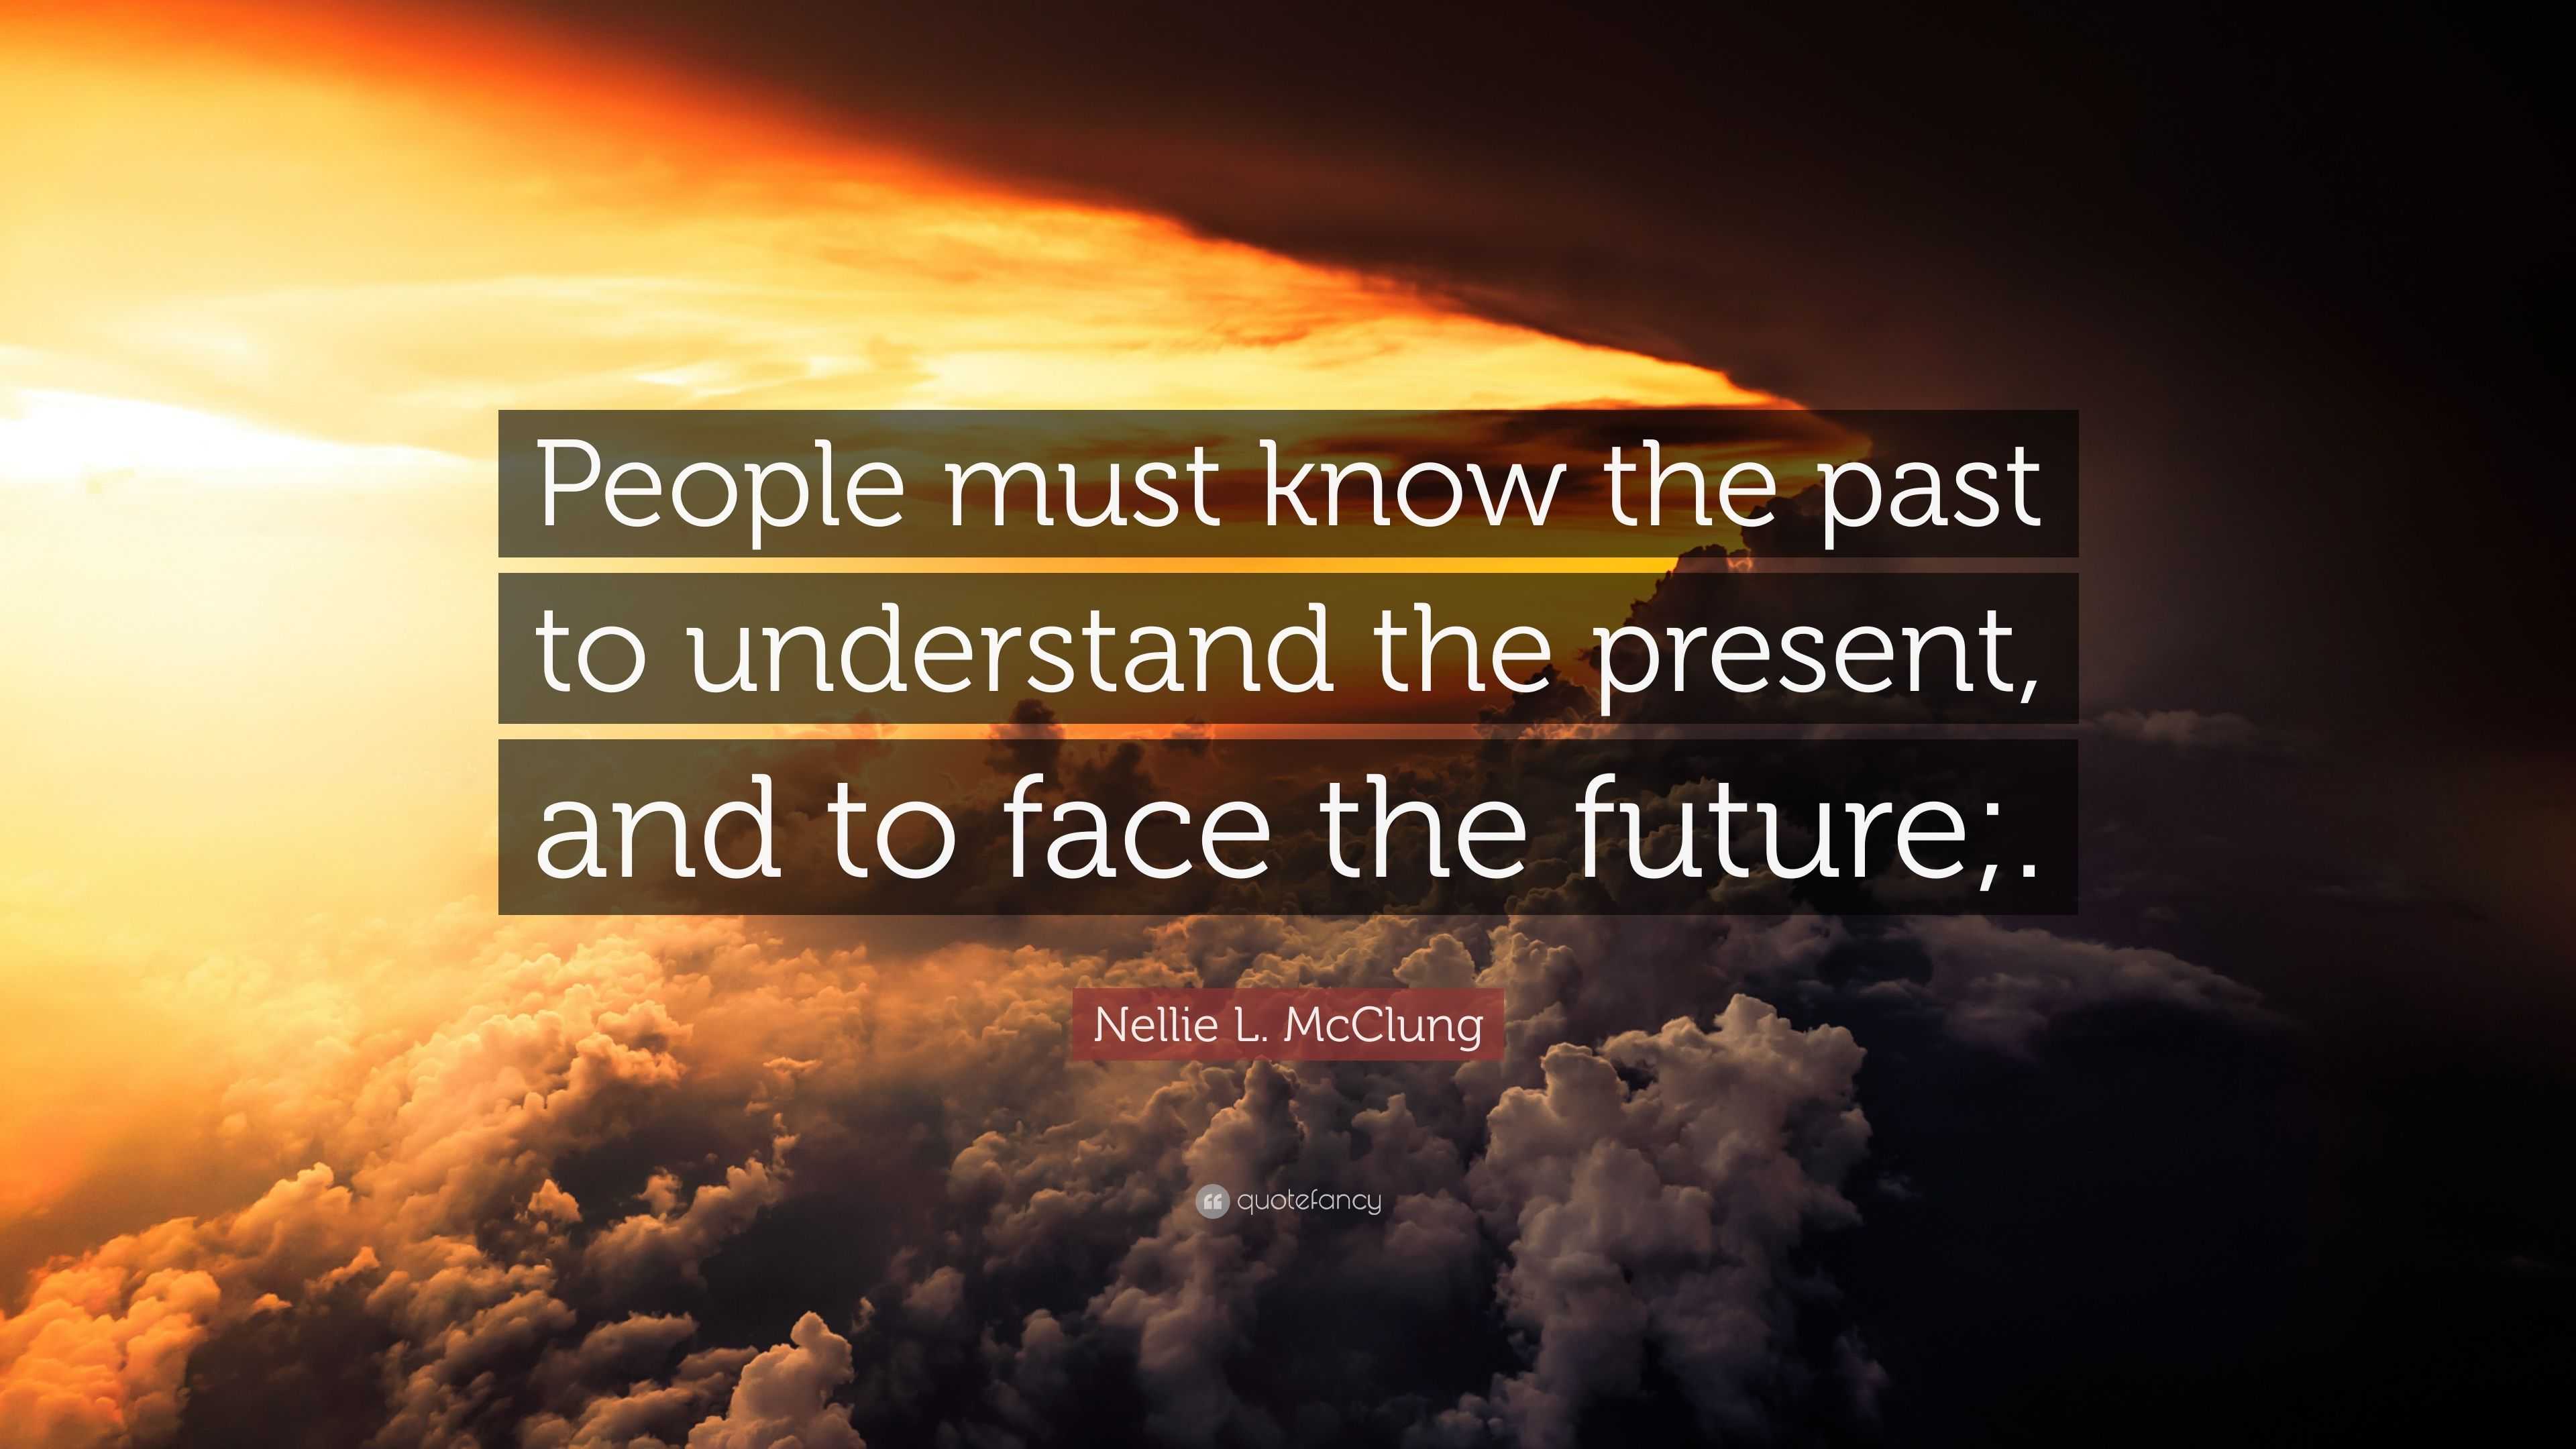 Nellie L. McClung Quote: “People must know the past to understand the ...